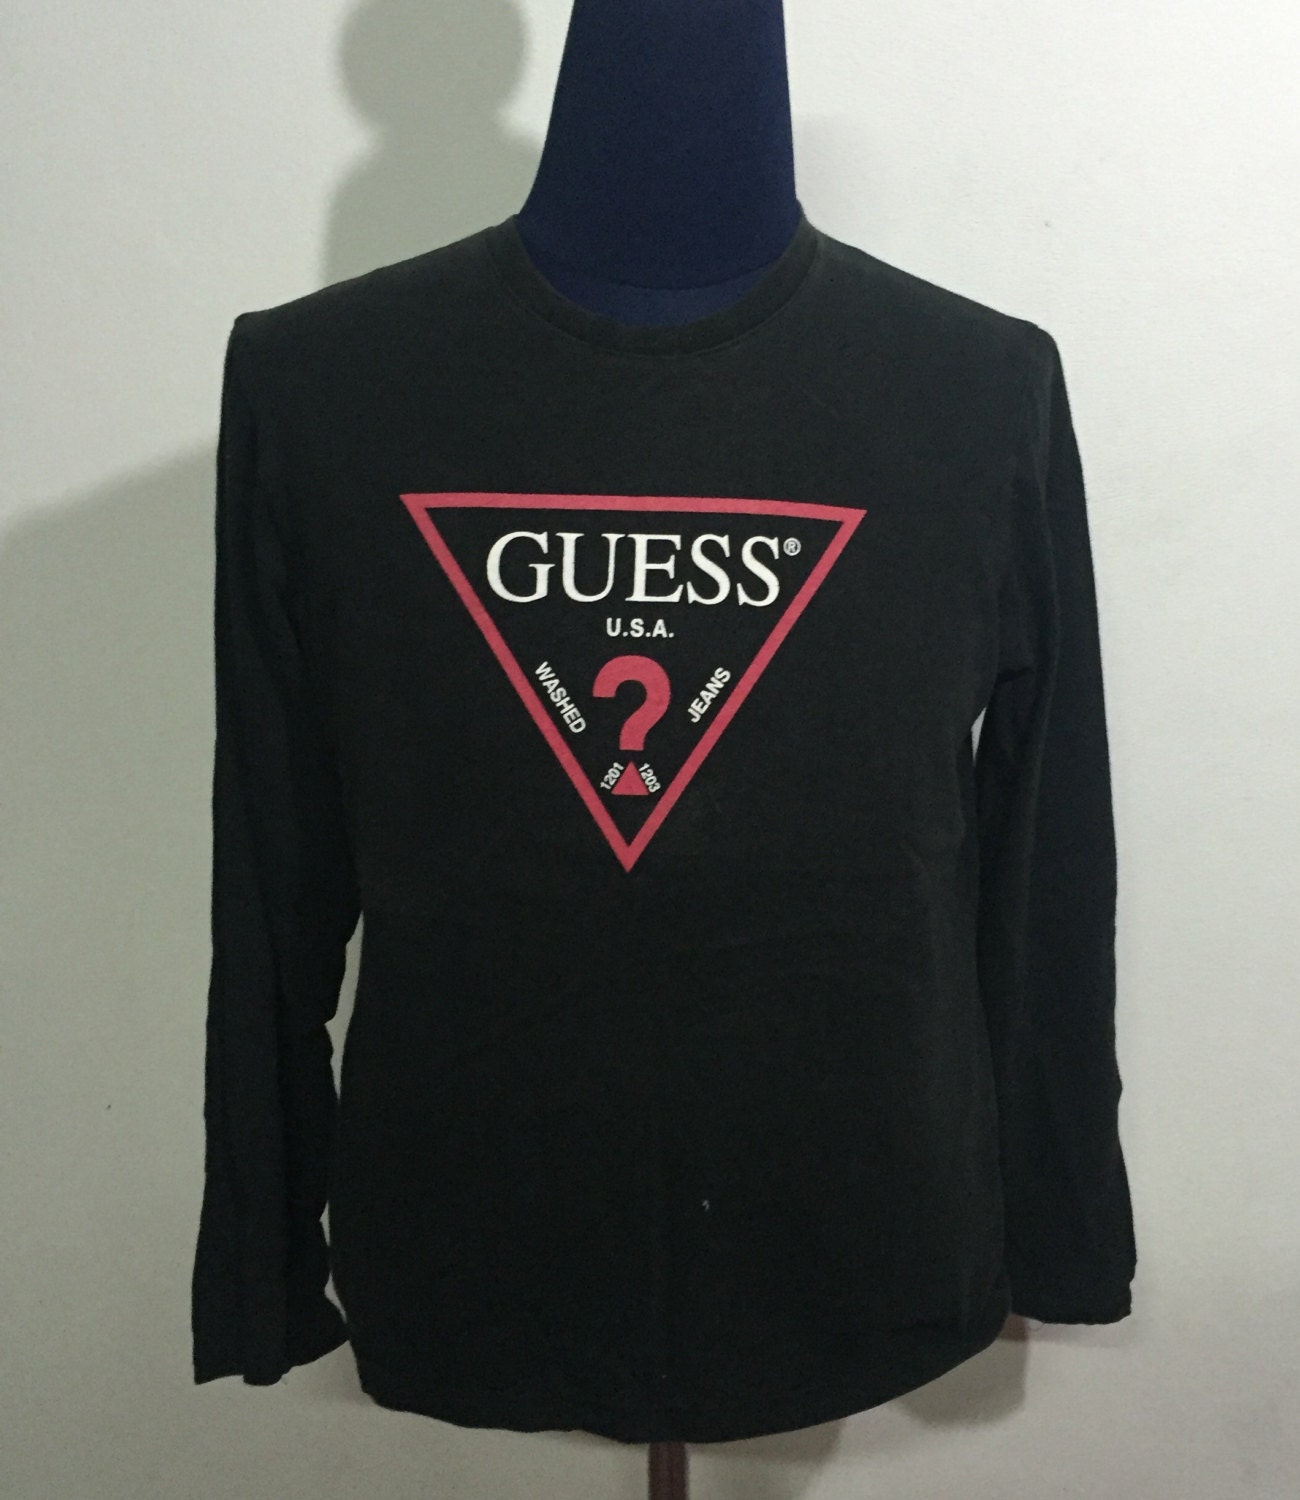 FREE SHIPPING Vintage Guess Long Sleeve Shirt by vintagegear777